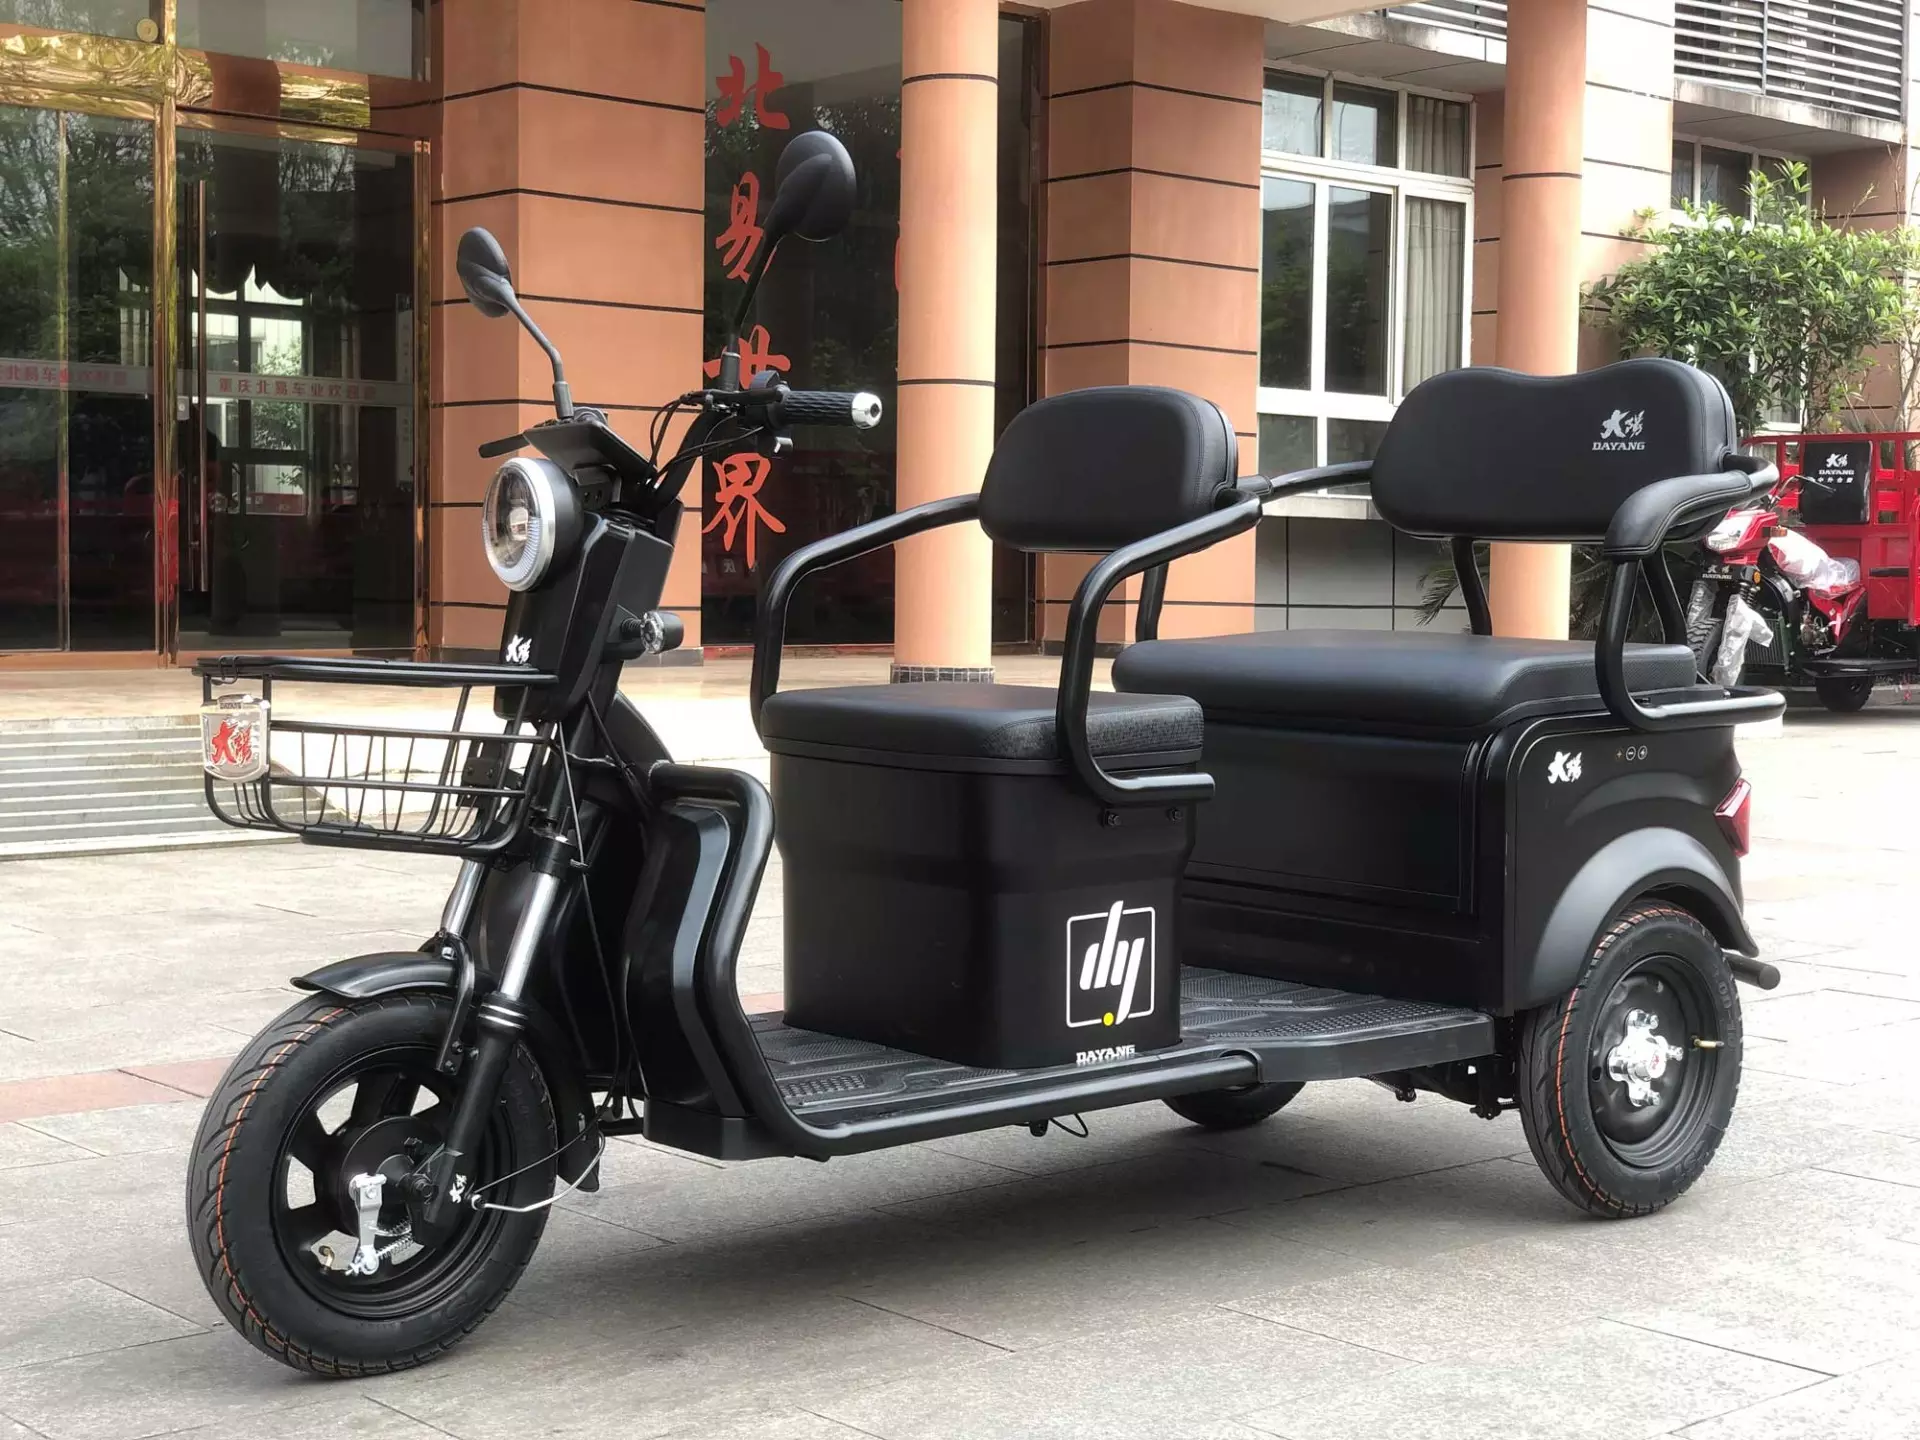 DAYANG 2021 High Quality Electric Trike Scooter Three Wheel Motorized Driving Type Tricycle Popular Black  Body China